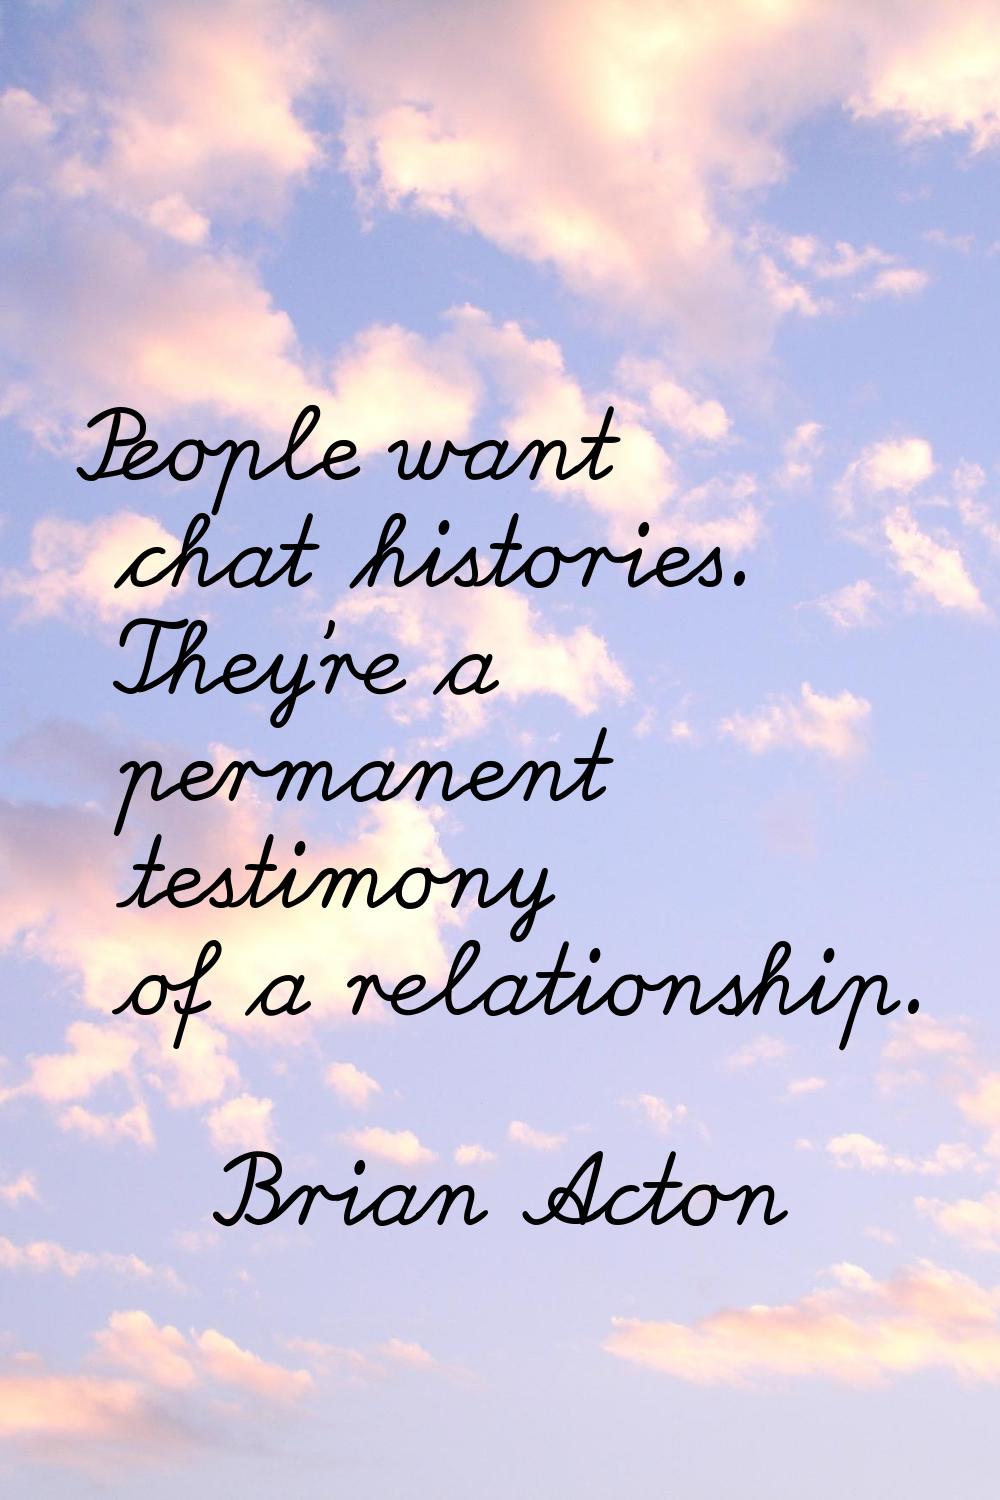 People want chat histories. They're a permanent testimony of a relationship.